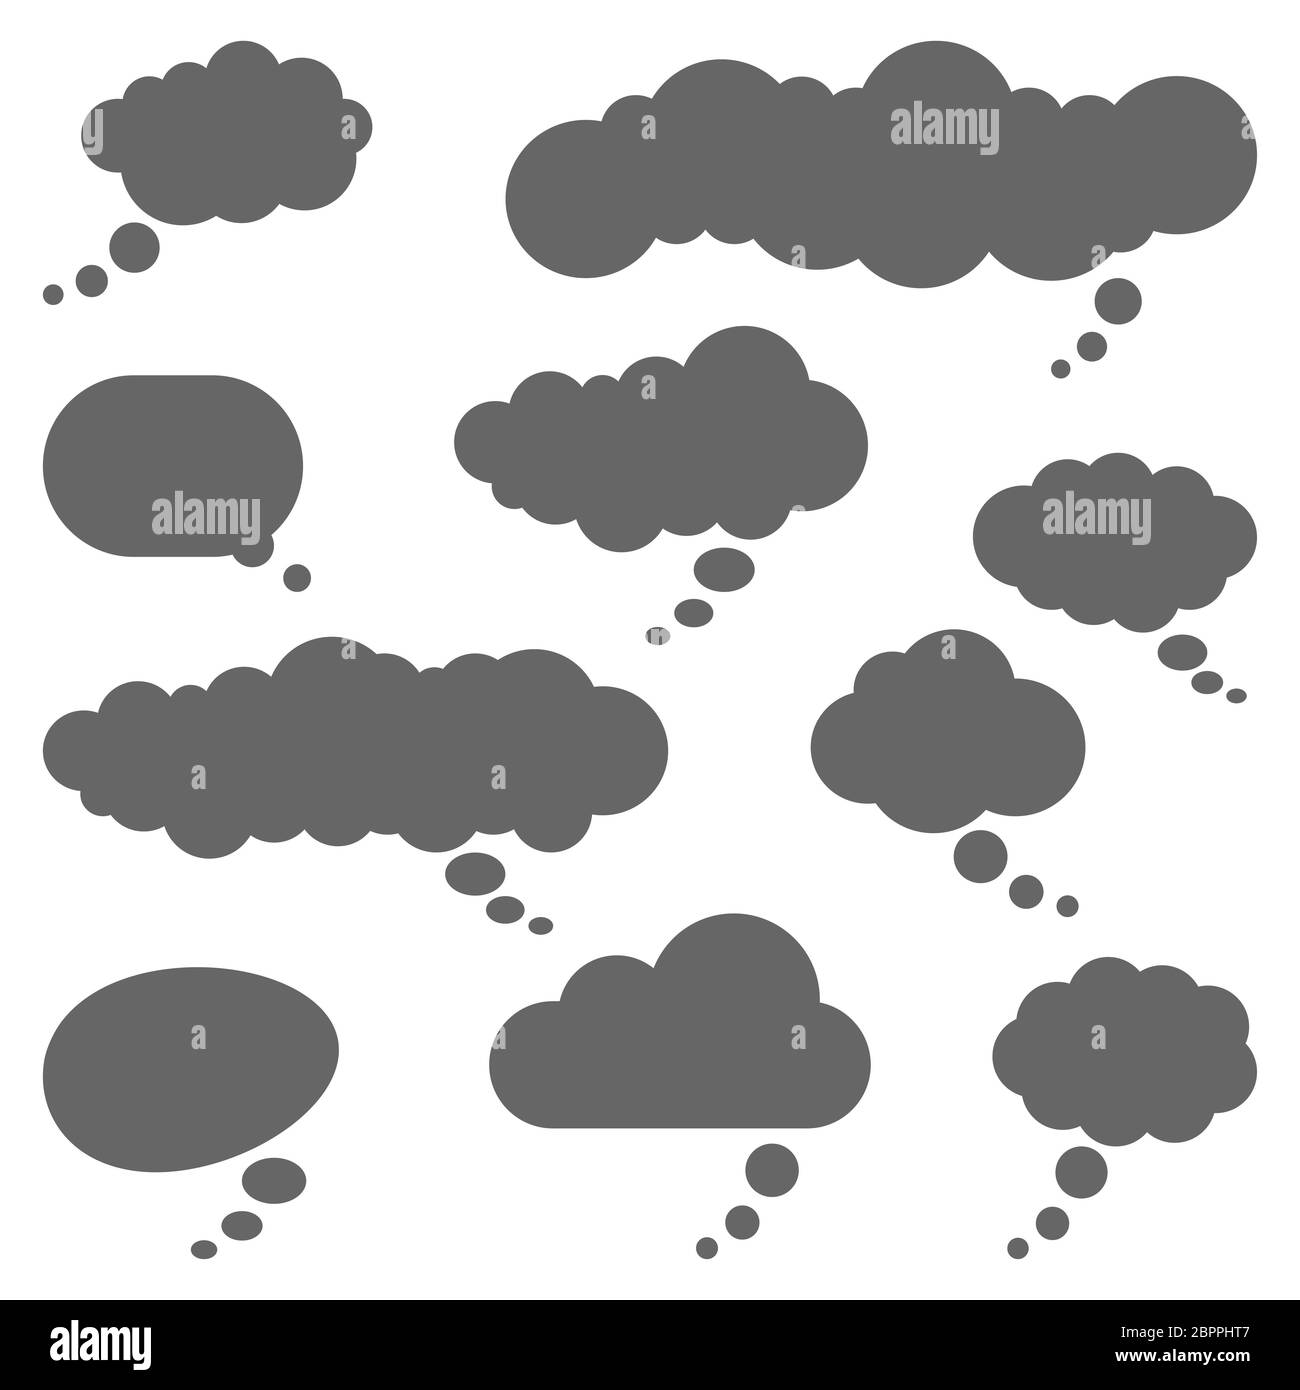 collection of different speech bubbles and thought bubbles with space for text Stock Photo